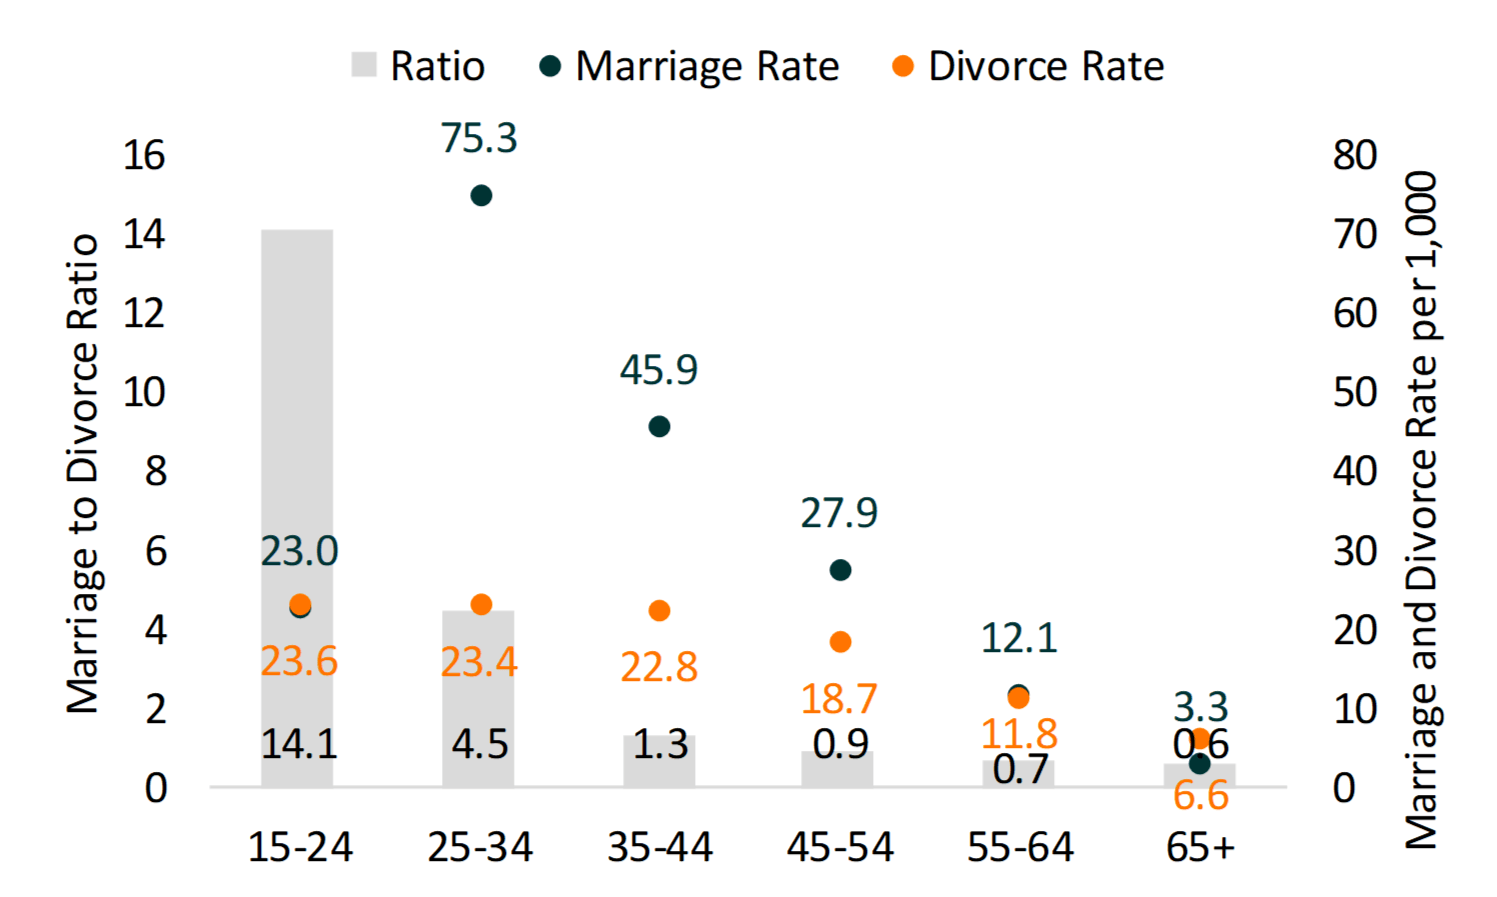 Bar chart showing Women’s Marriage to Divorce Ratio and Marriage and Divorce Rate by Age Group, 2018